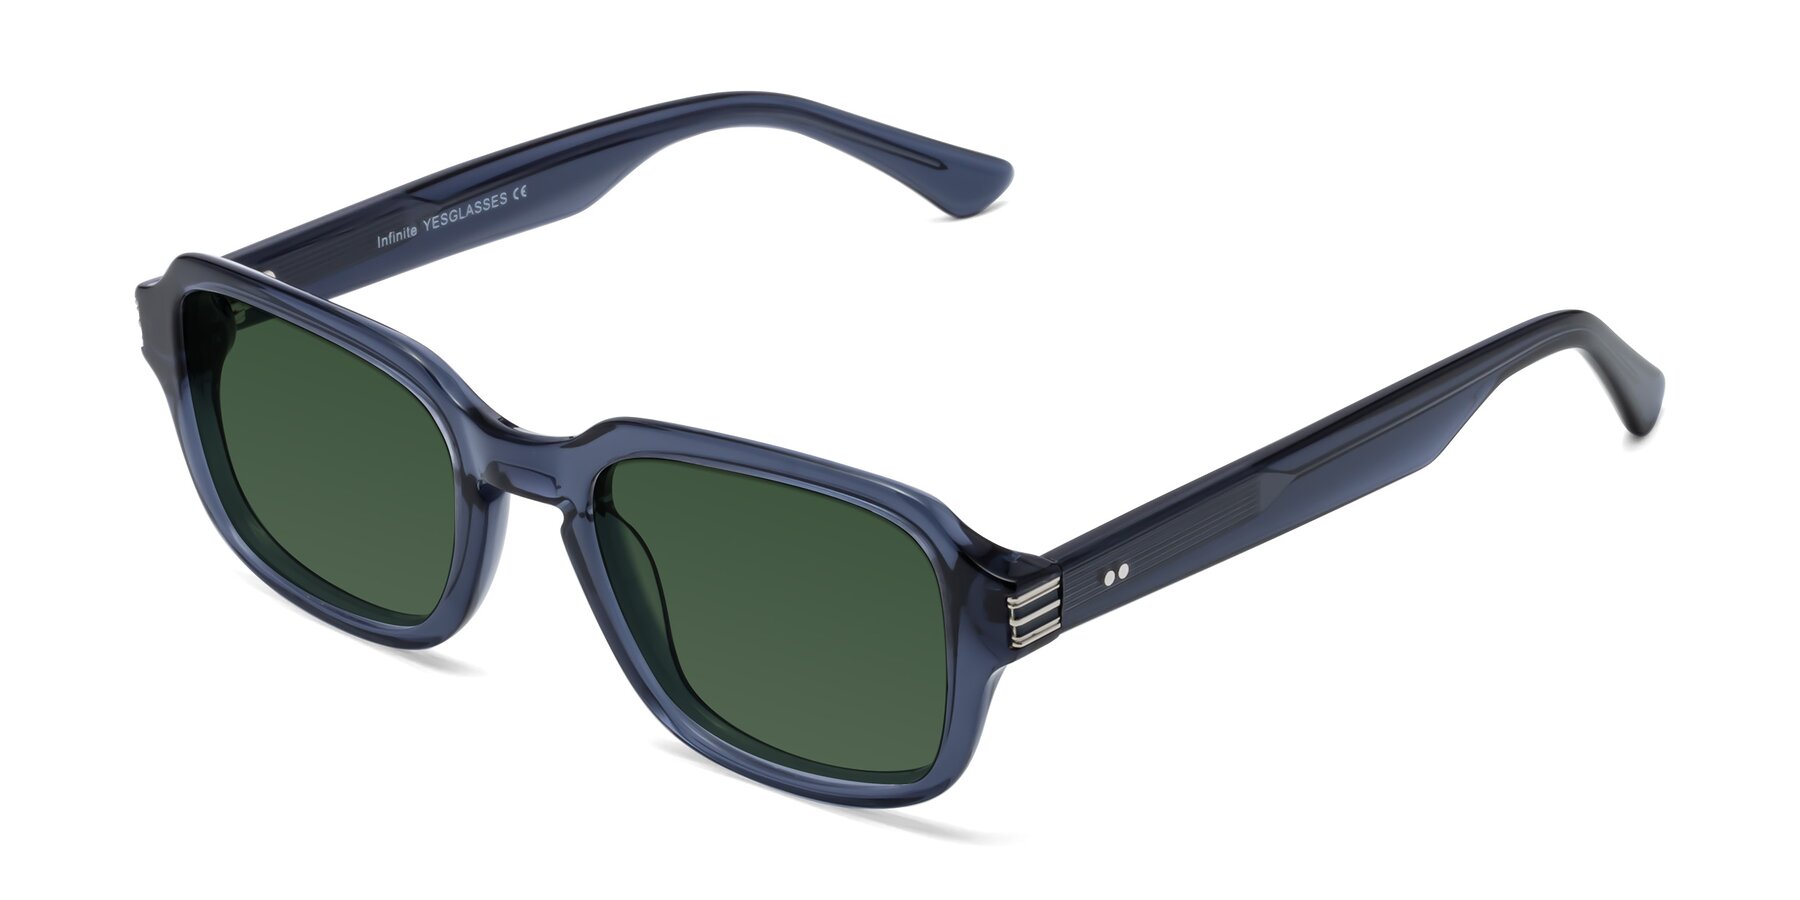 Angle of Infinite in Dark Blue with Green Tinted Lenses